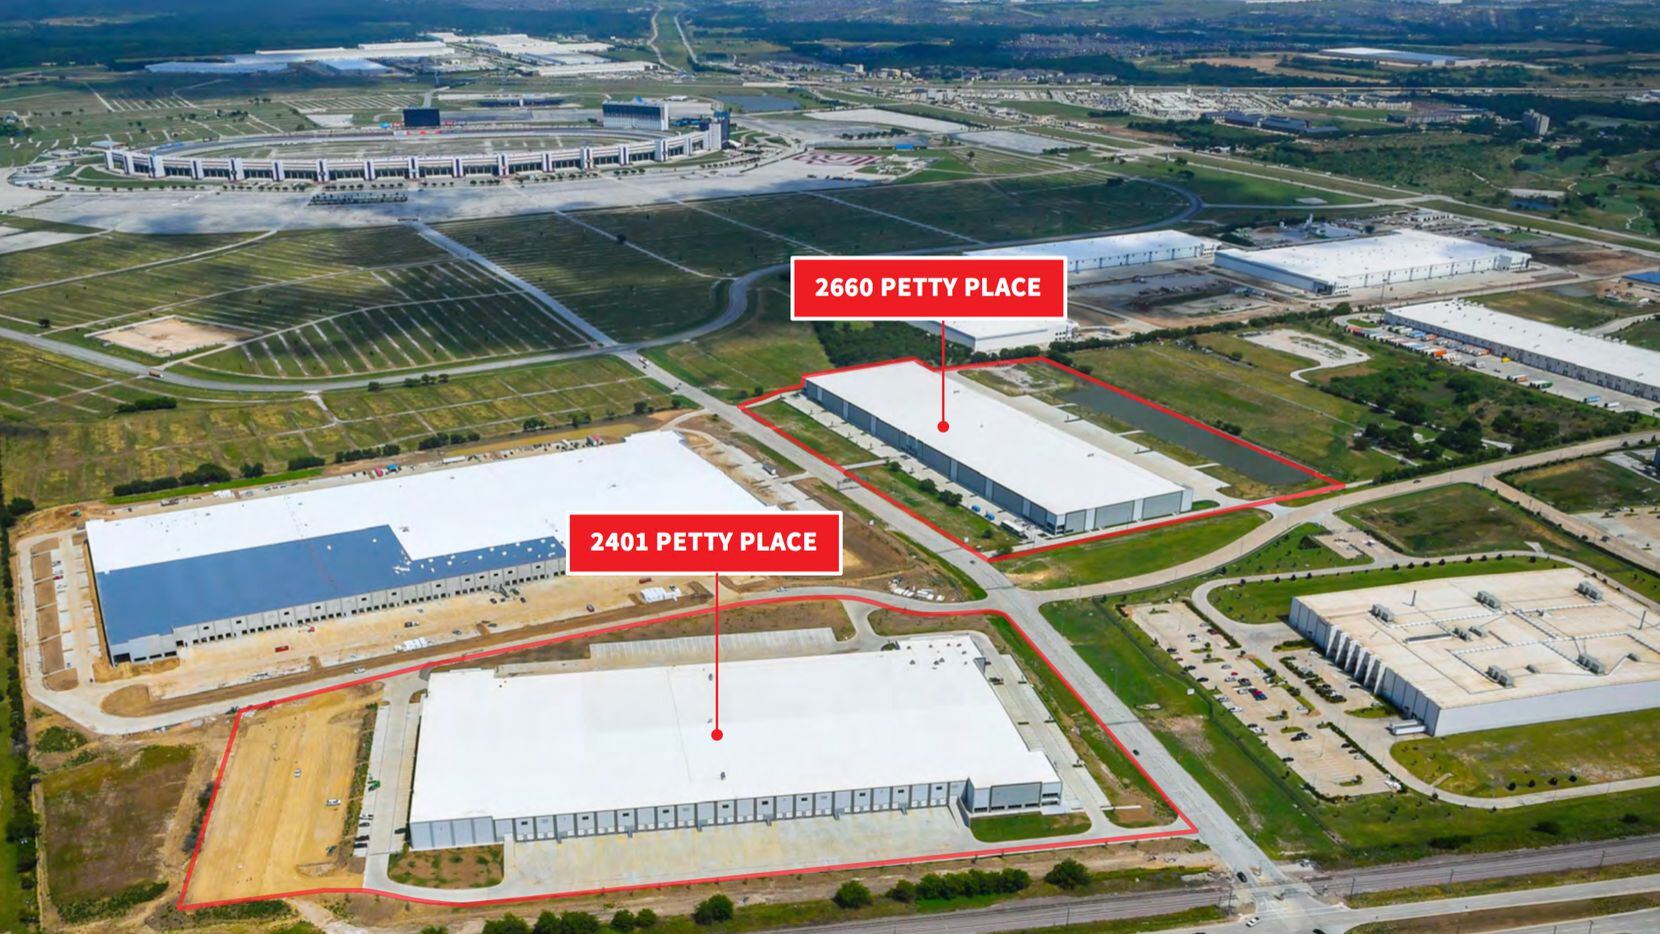 The two buildings on Petty Place are just west of the Texas Motor Speedway.